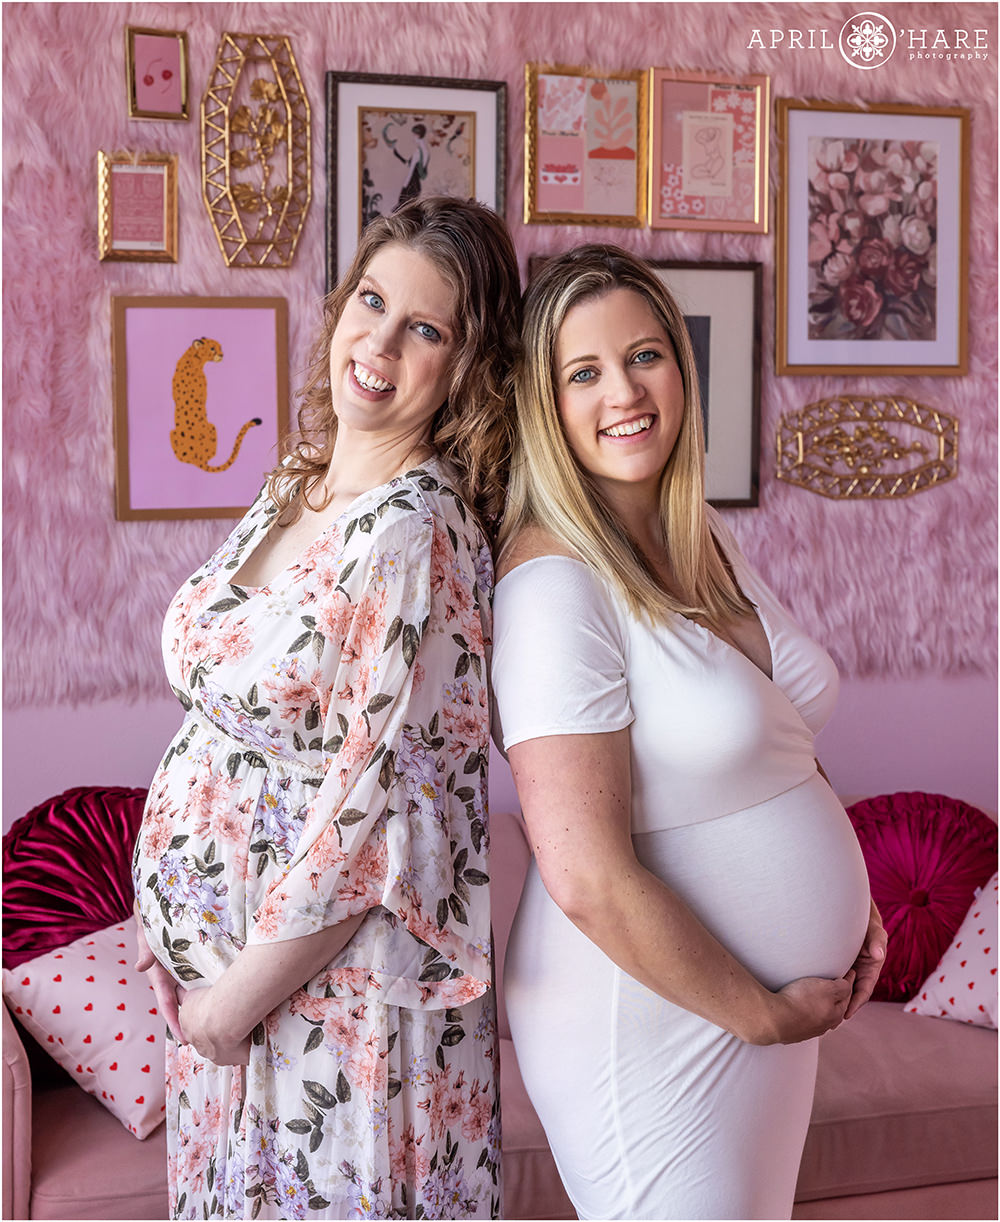 Two pregnant sisters both expecting their first babies two weeks apart are photographed together at their pretty pink Valentine's Day themed maternity session at a styled set at an indoor photography studio in Denver Colorado